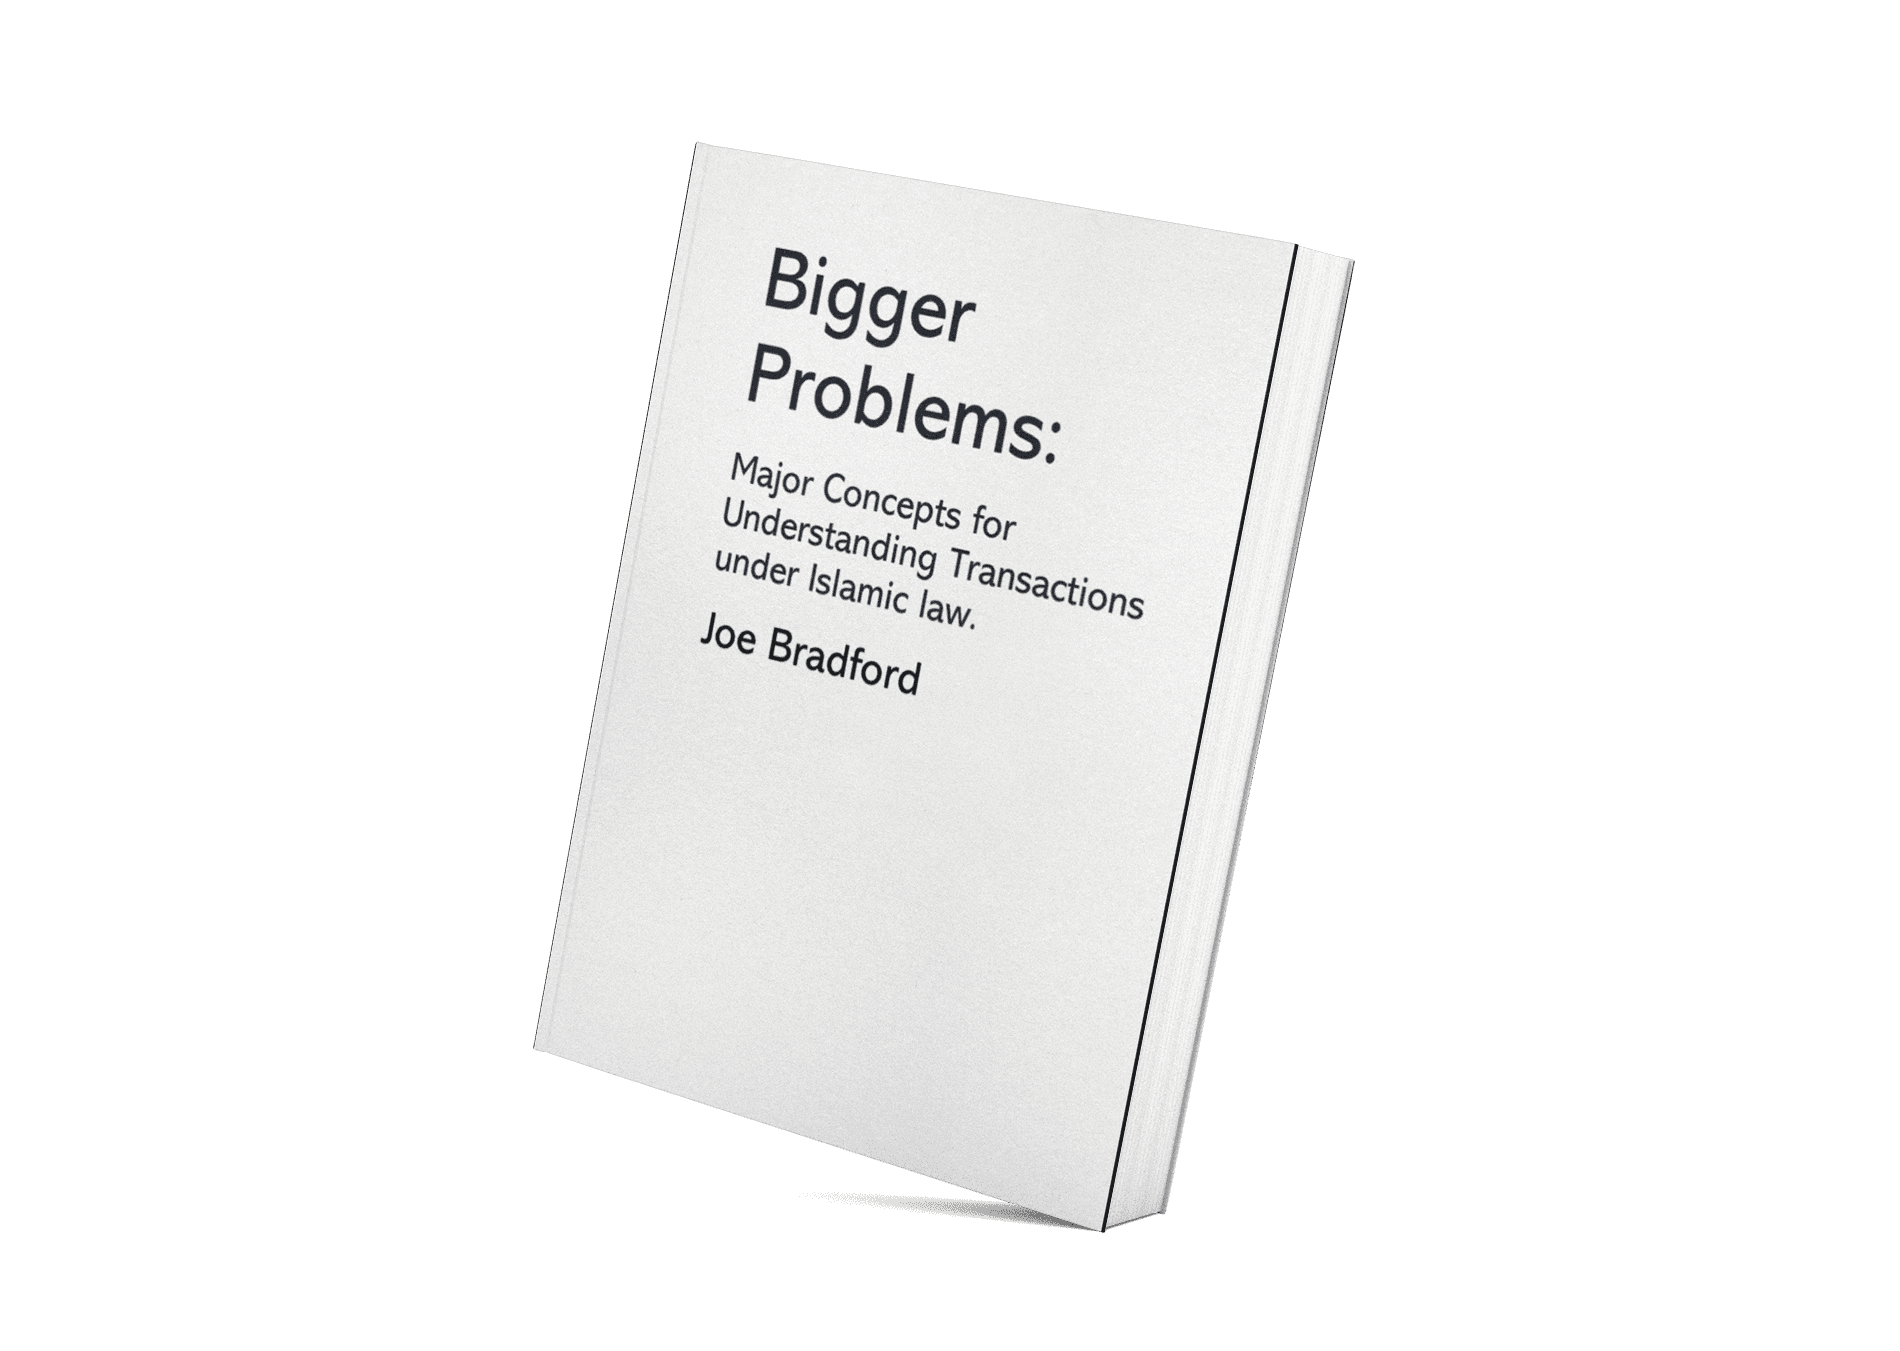 Bigger Problems: Major Concepts for Understanding Transactions under Islamic Law